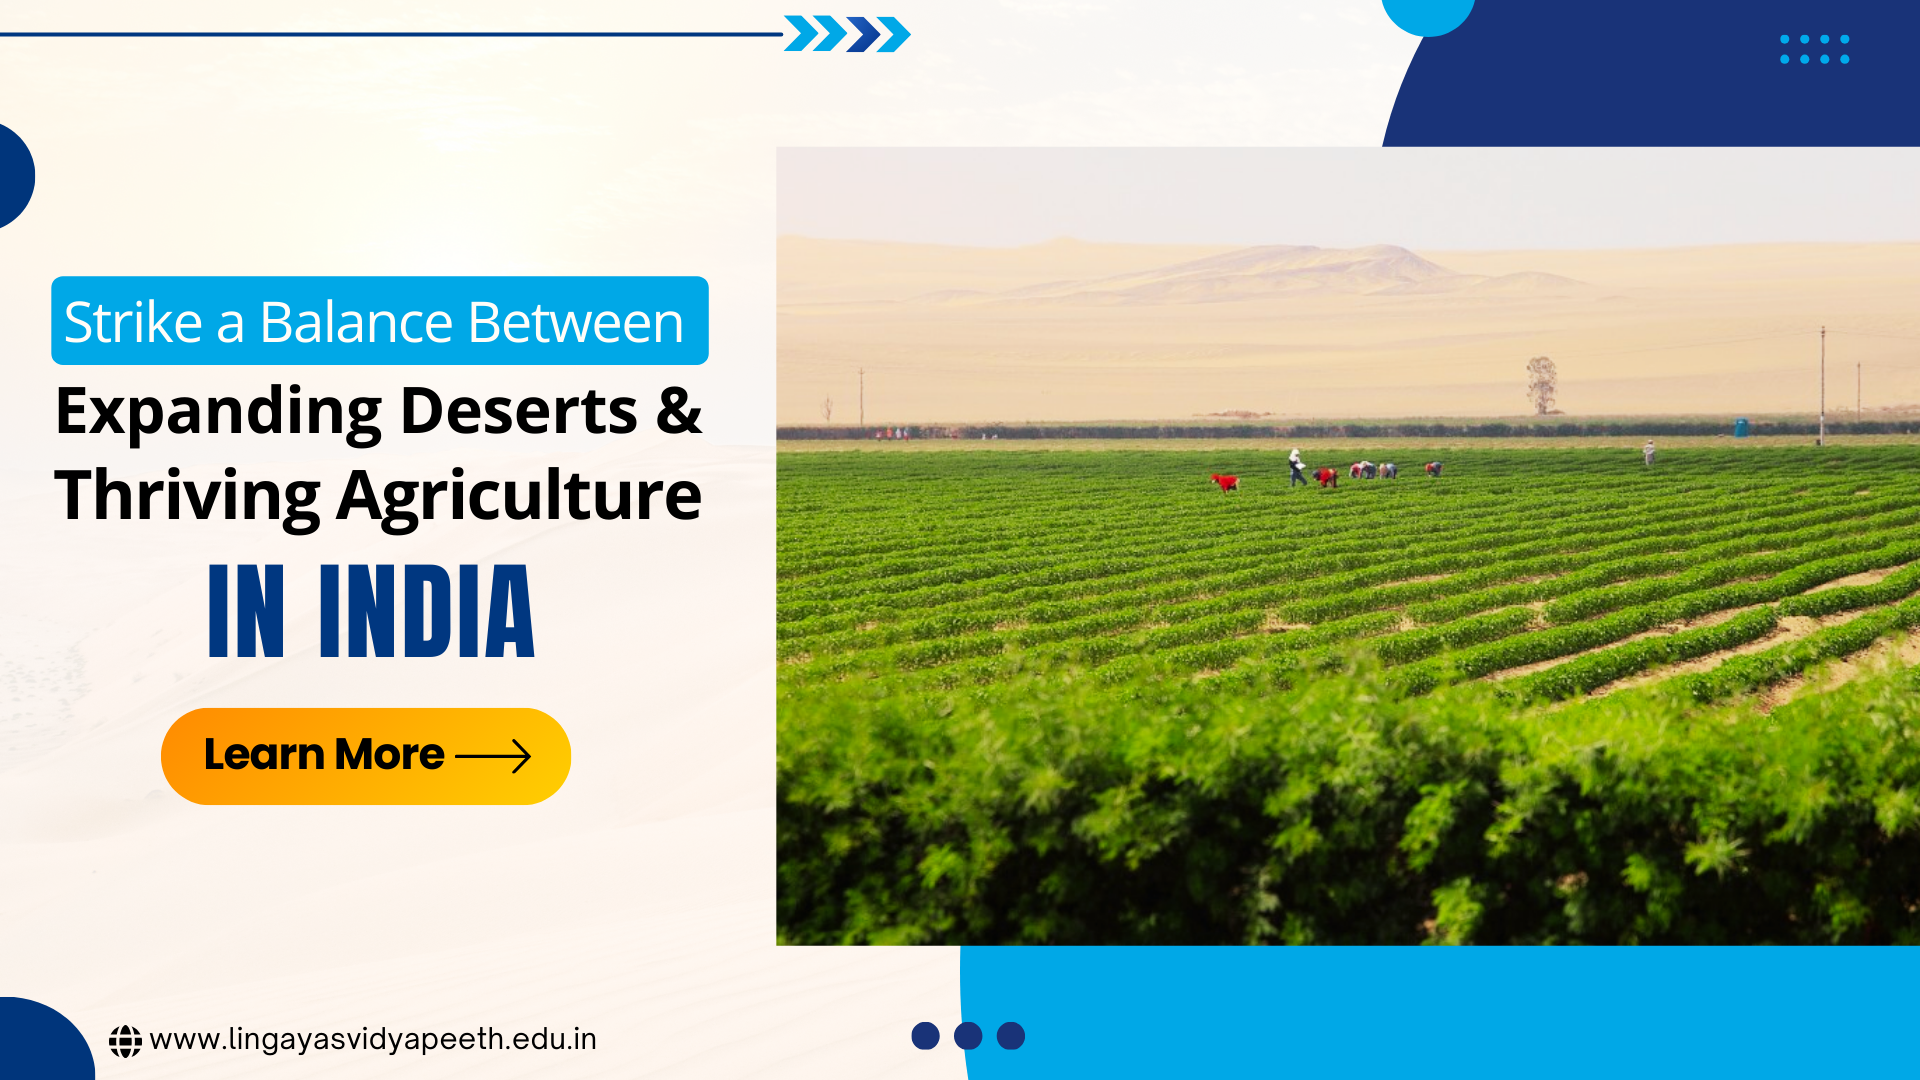 Can India Strike a Balance Between Expanding Deserts and Thriving Agriculture?